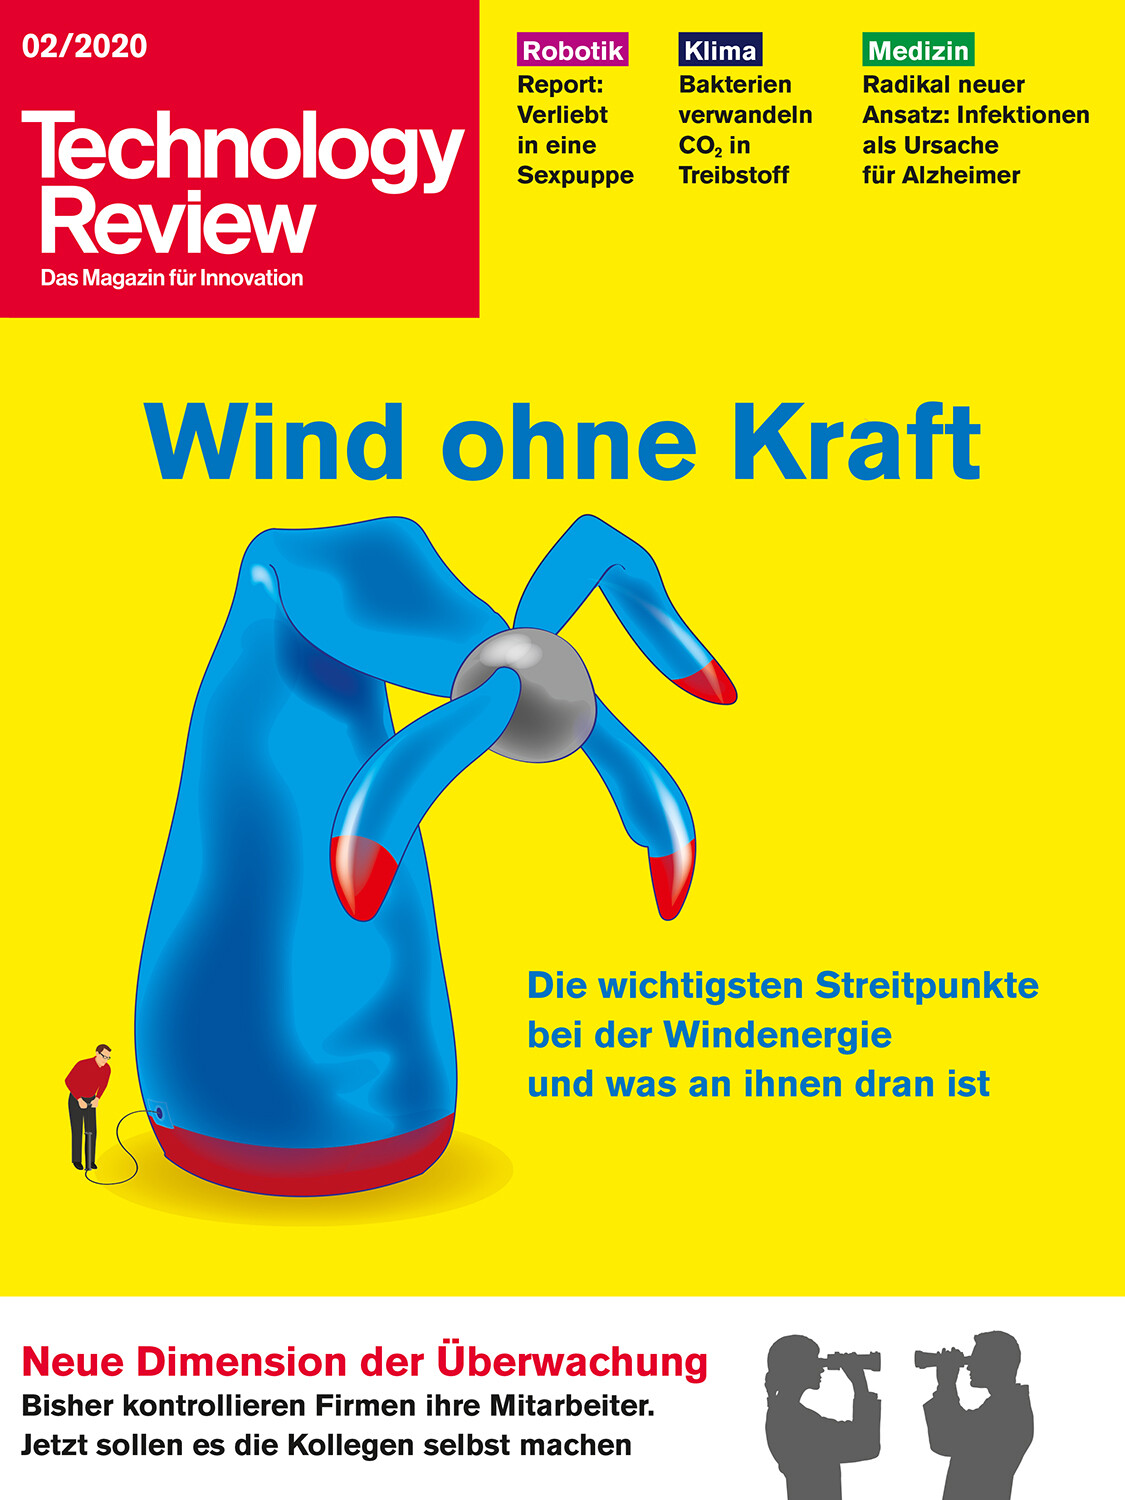 Technology Review 02/2020